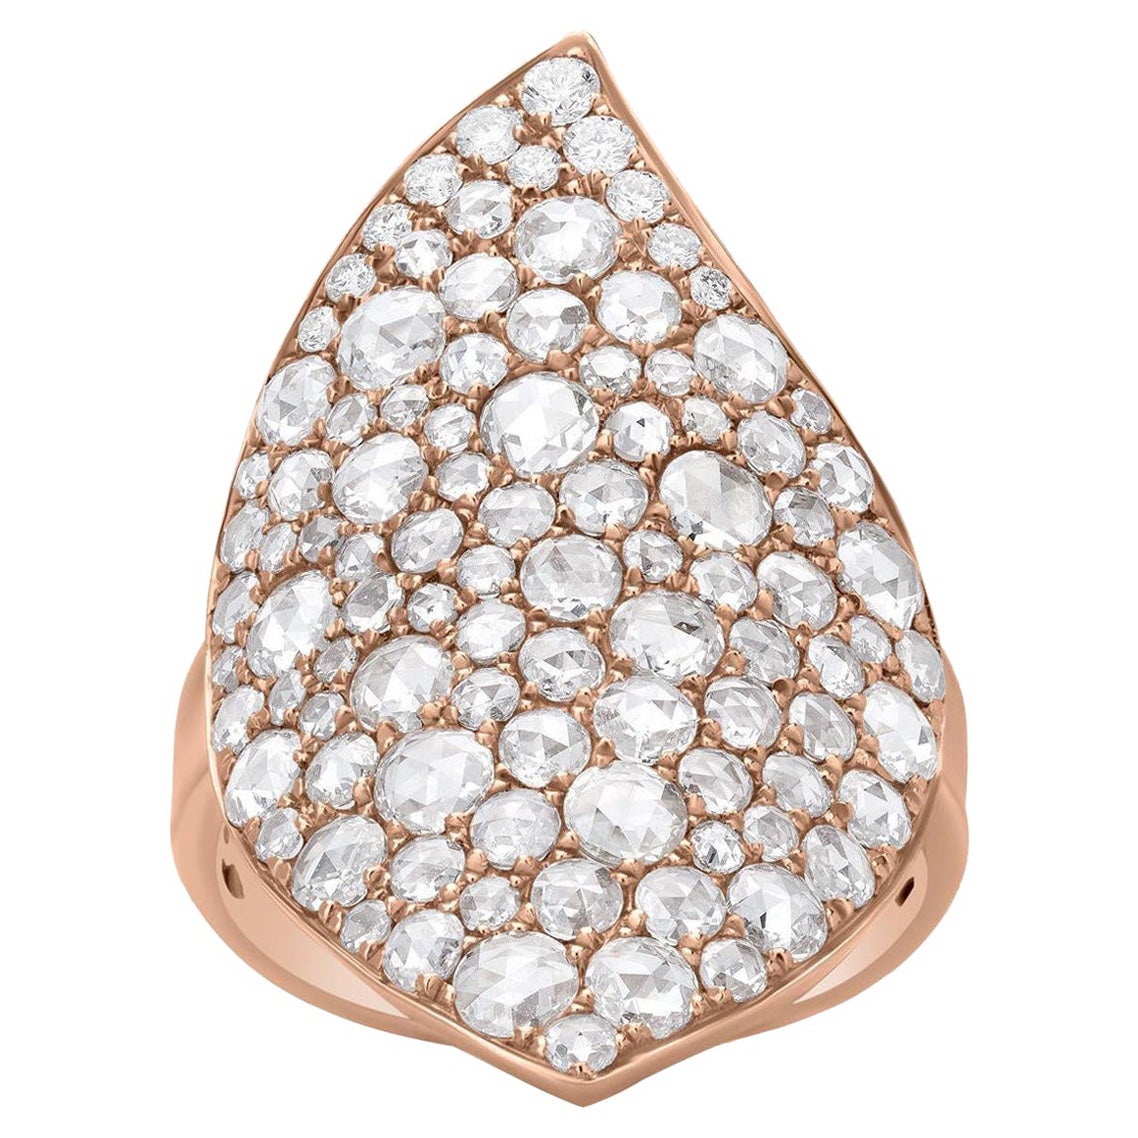 Luxle 2.58 Cttw. Rose-Cut Round Diamond Leaf Cluster Ring in 18k Rose Gold